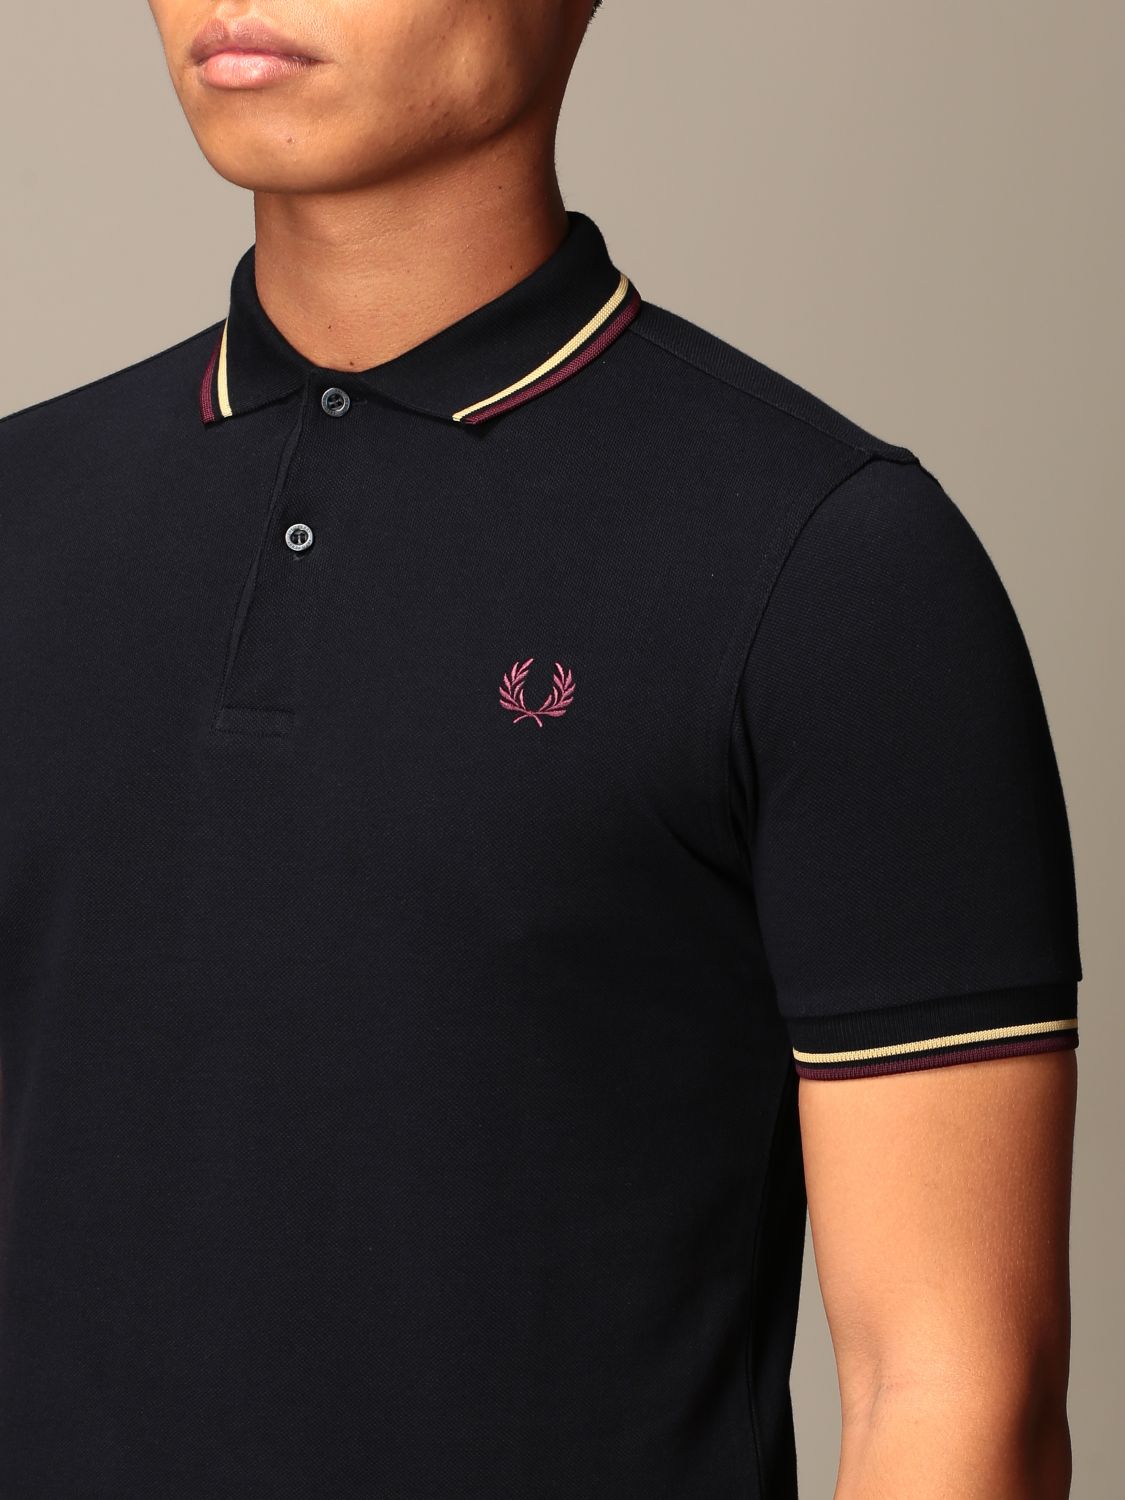 fred perry polo shirt navy